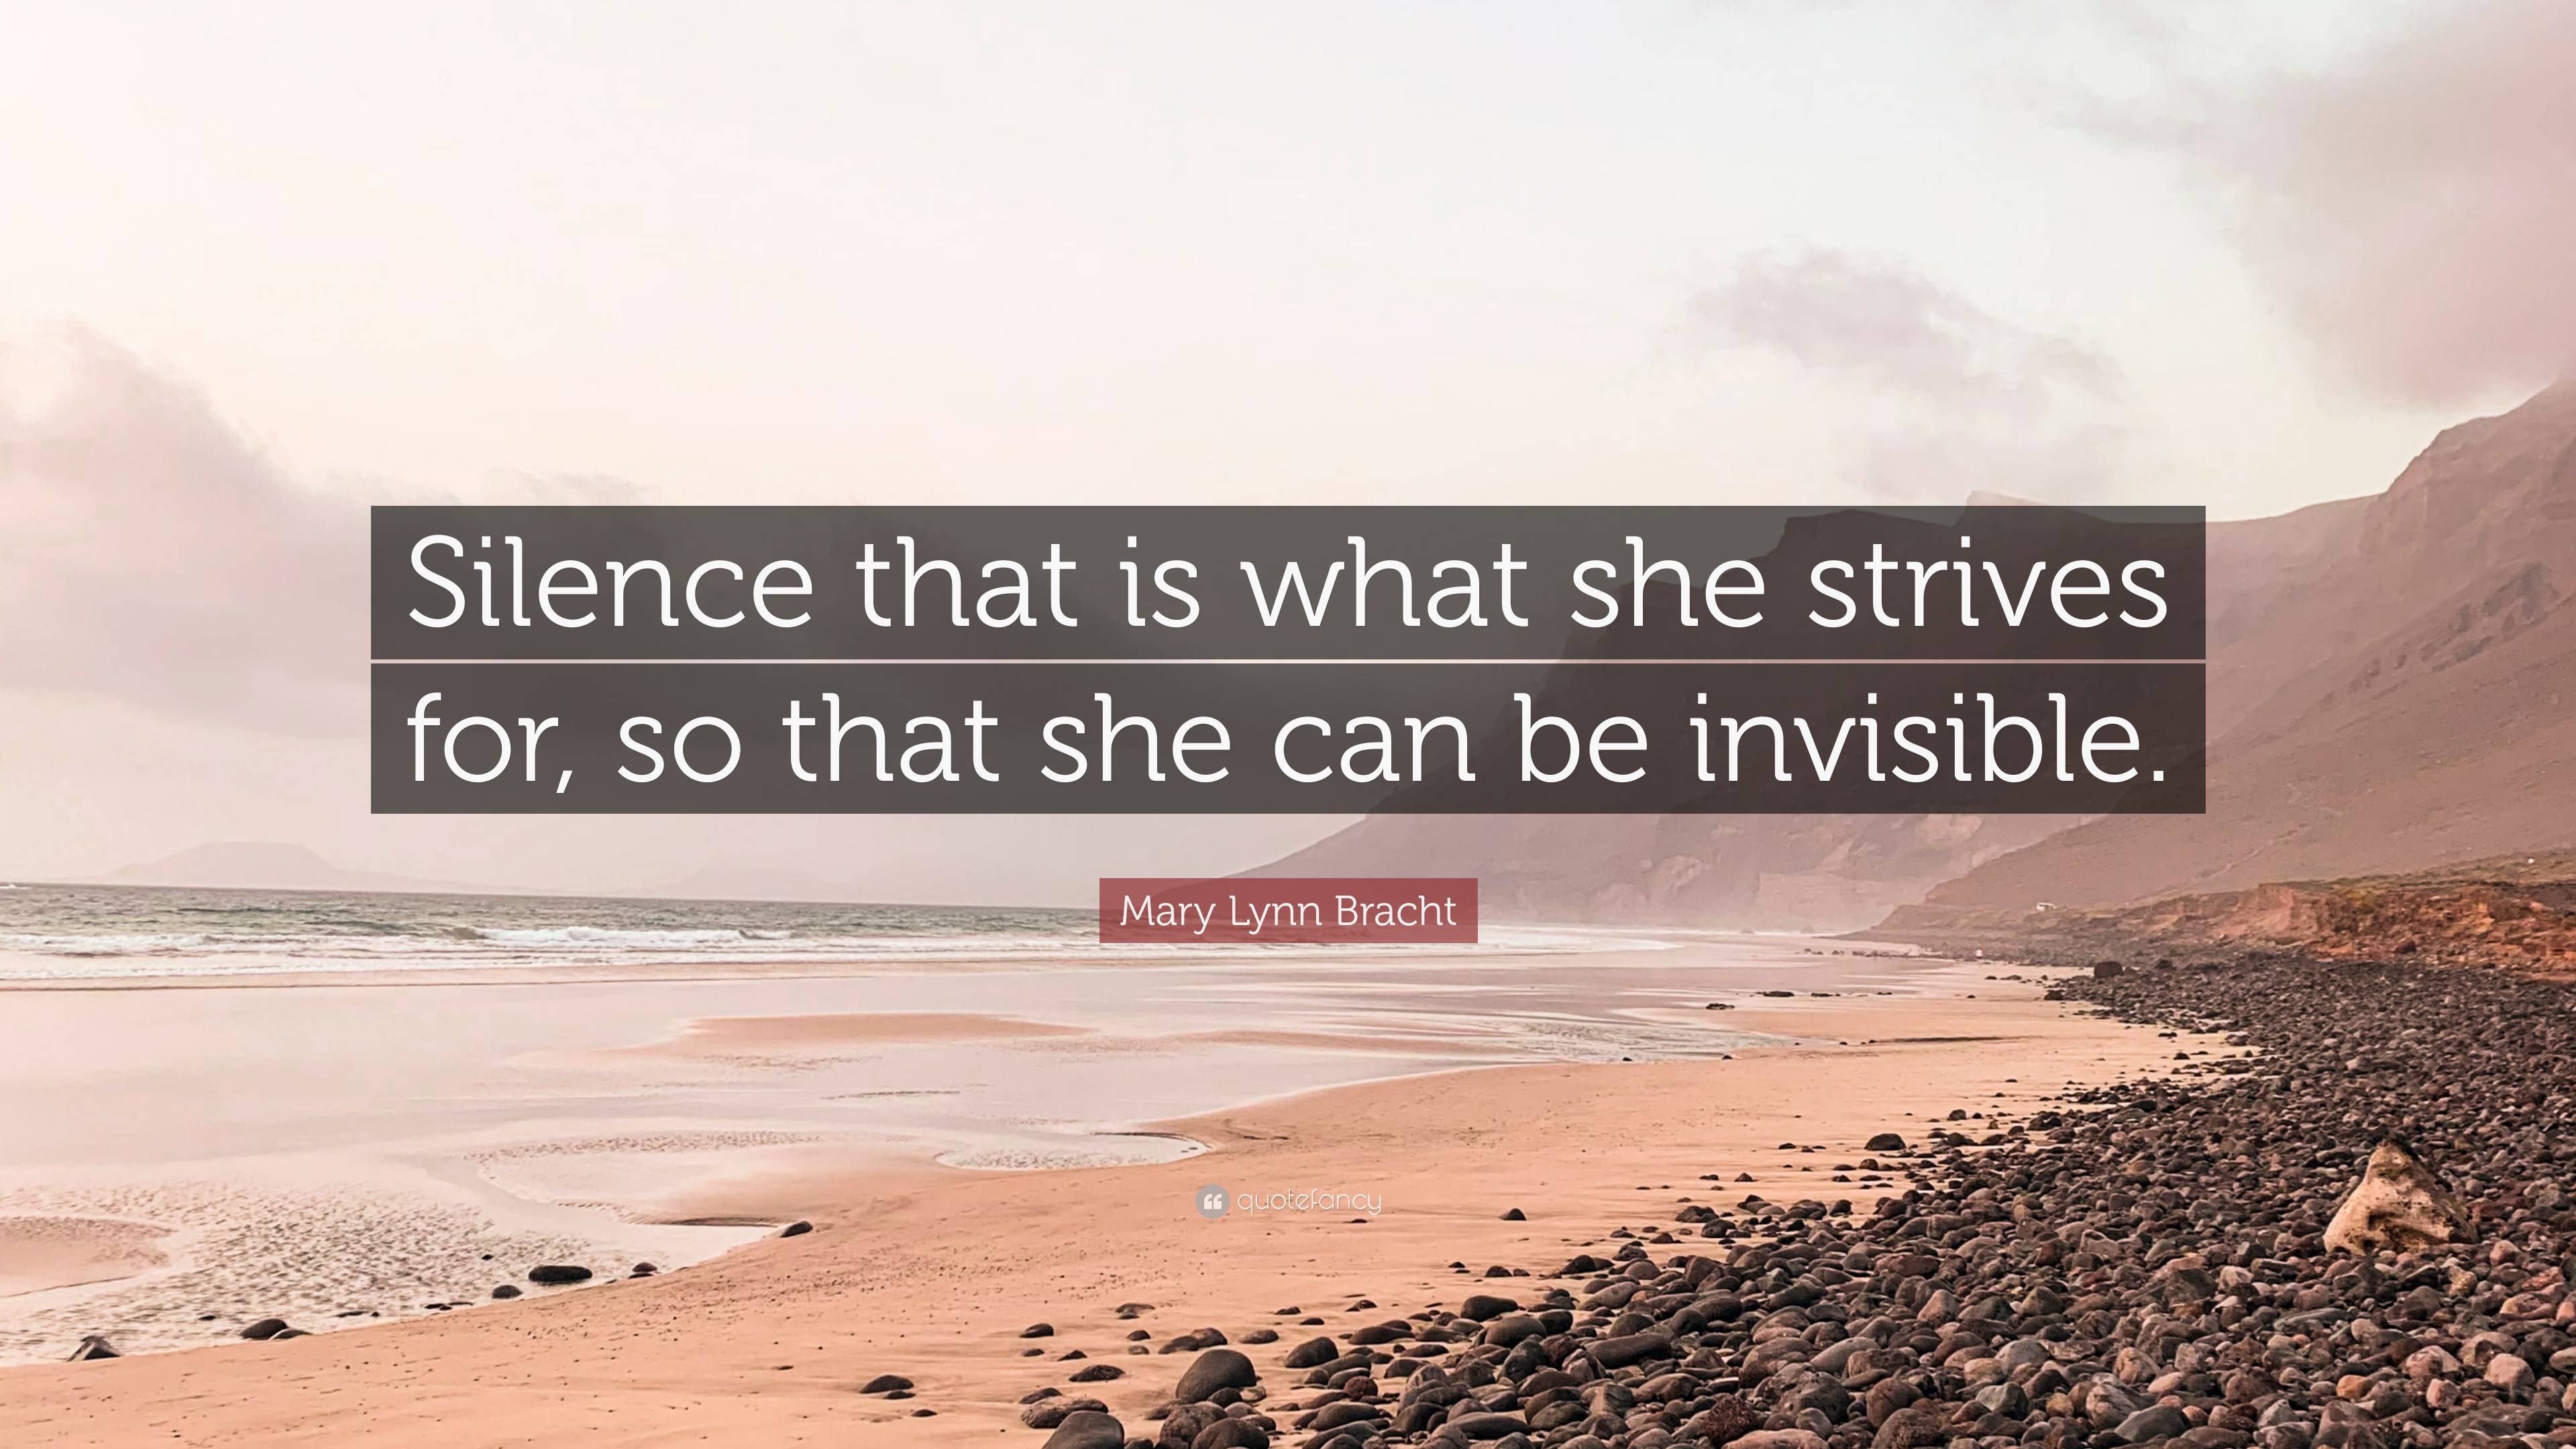 Mary Lynn Bracht Quote: “Silence that is what she strives for, so that ...